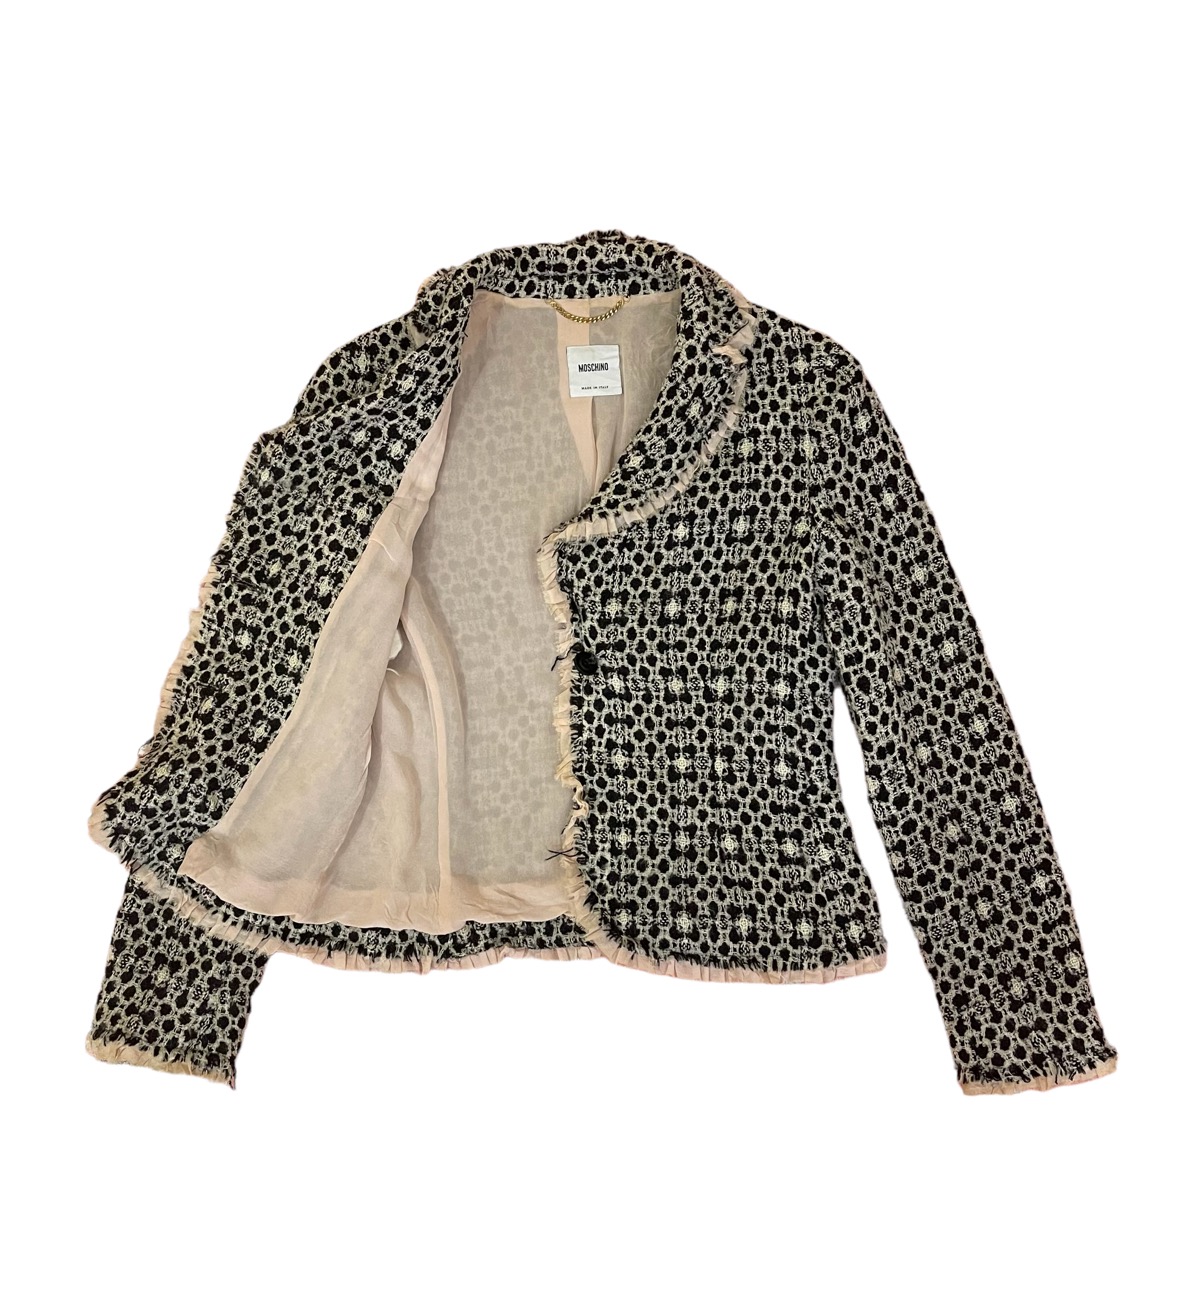 Moschino women jacket made in italy - 3